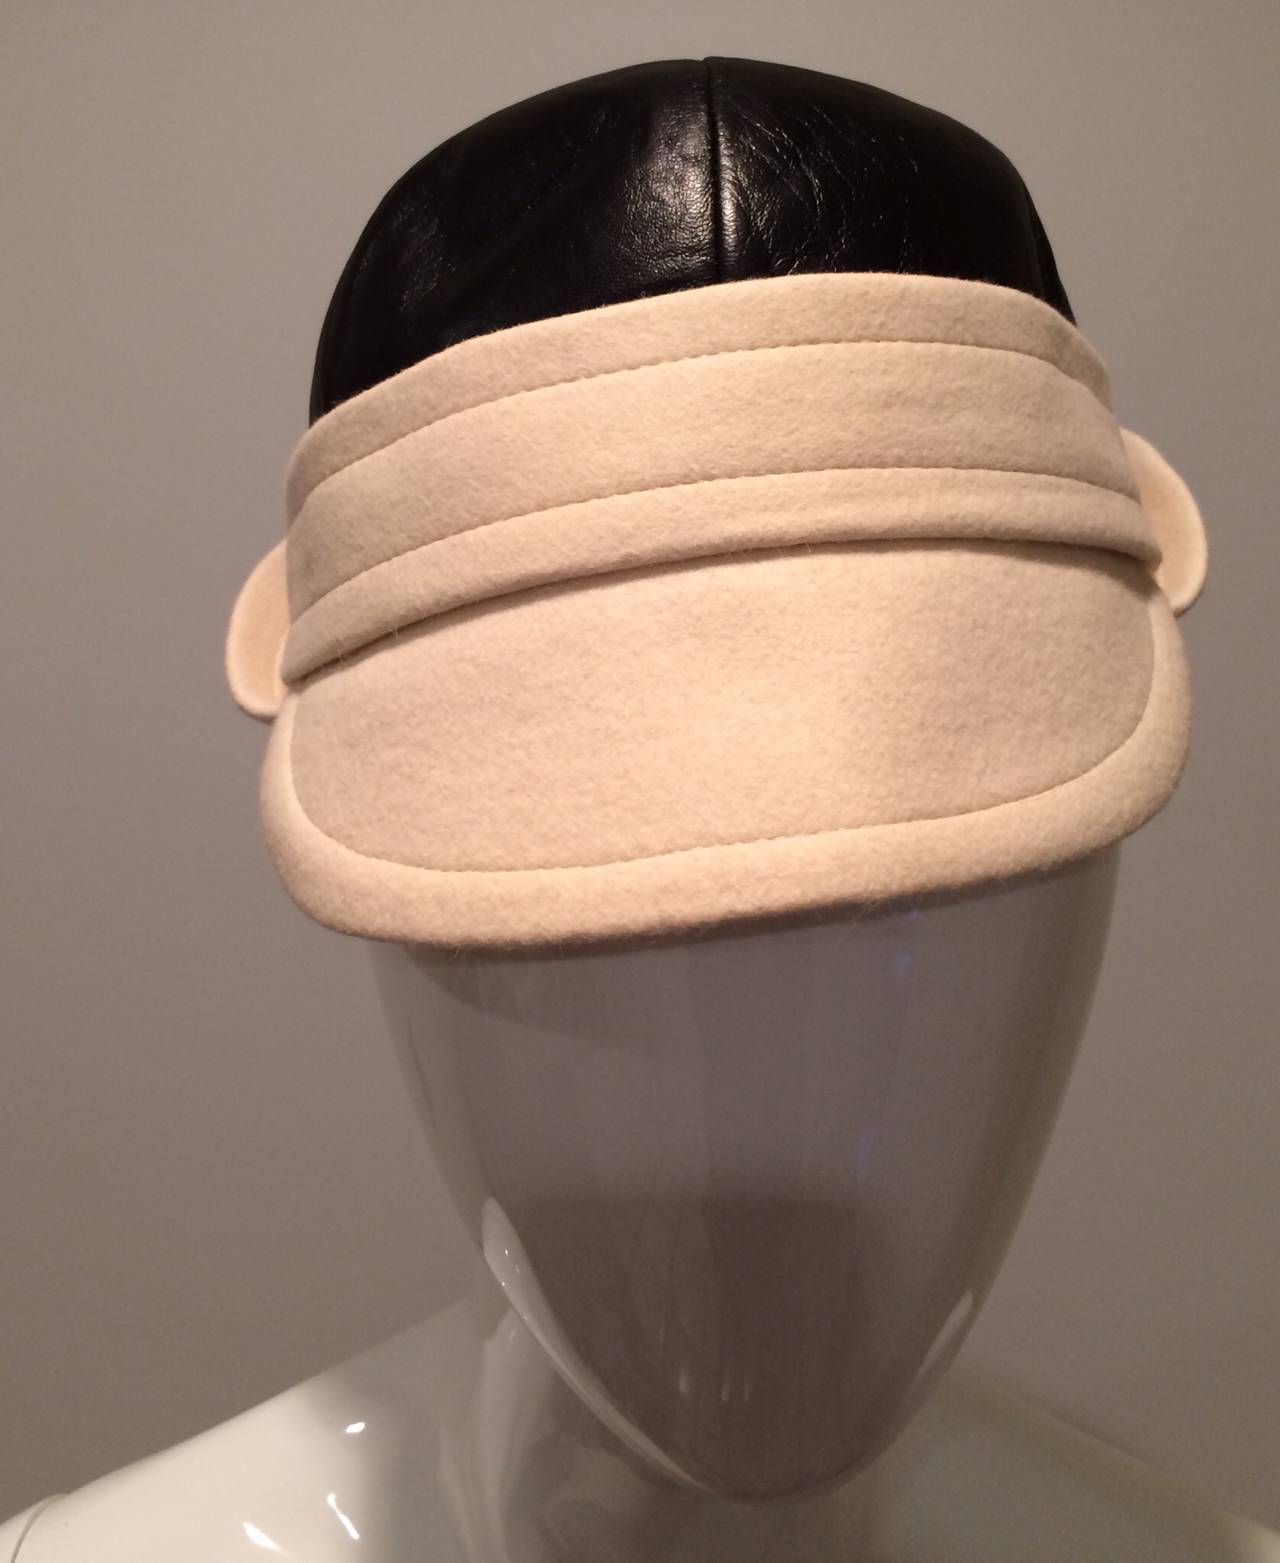 This Yves Saint Laurent hat is new old stock with  store tags. It is black leather and ivory felt. Best for a size small. 20